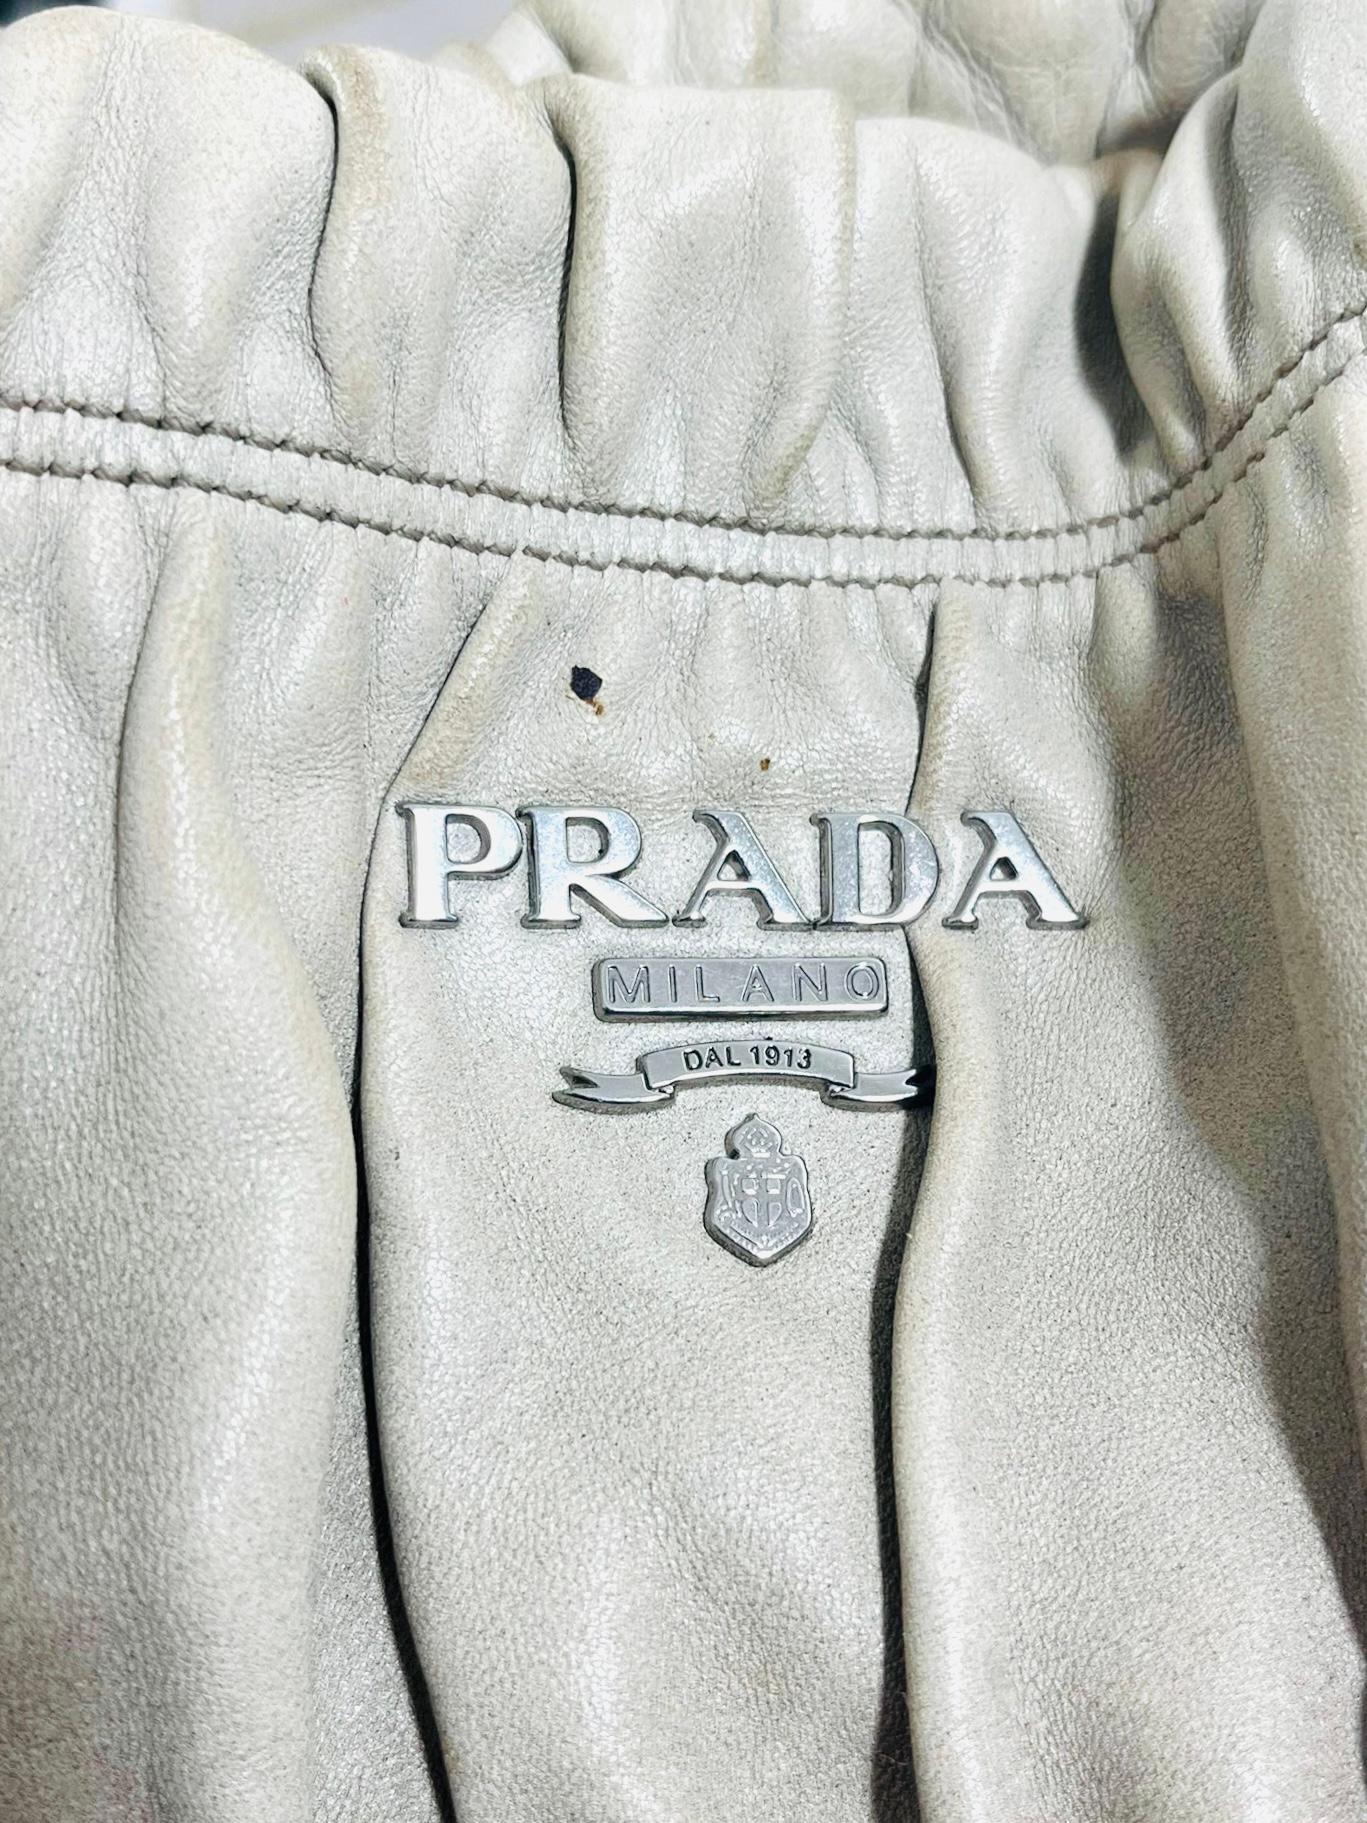 Prada Gaufre Leather Tote Bag For Sale 4